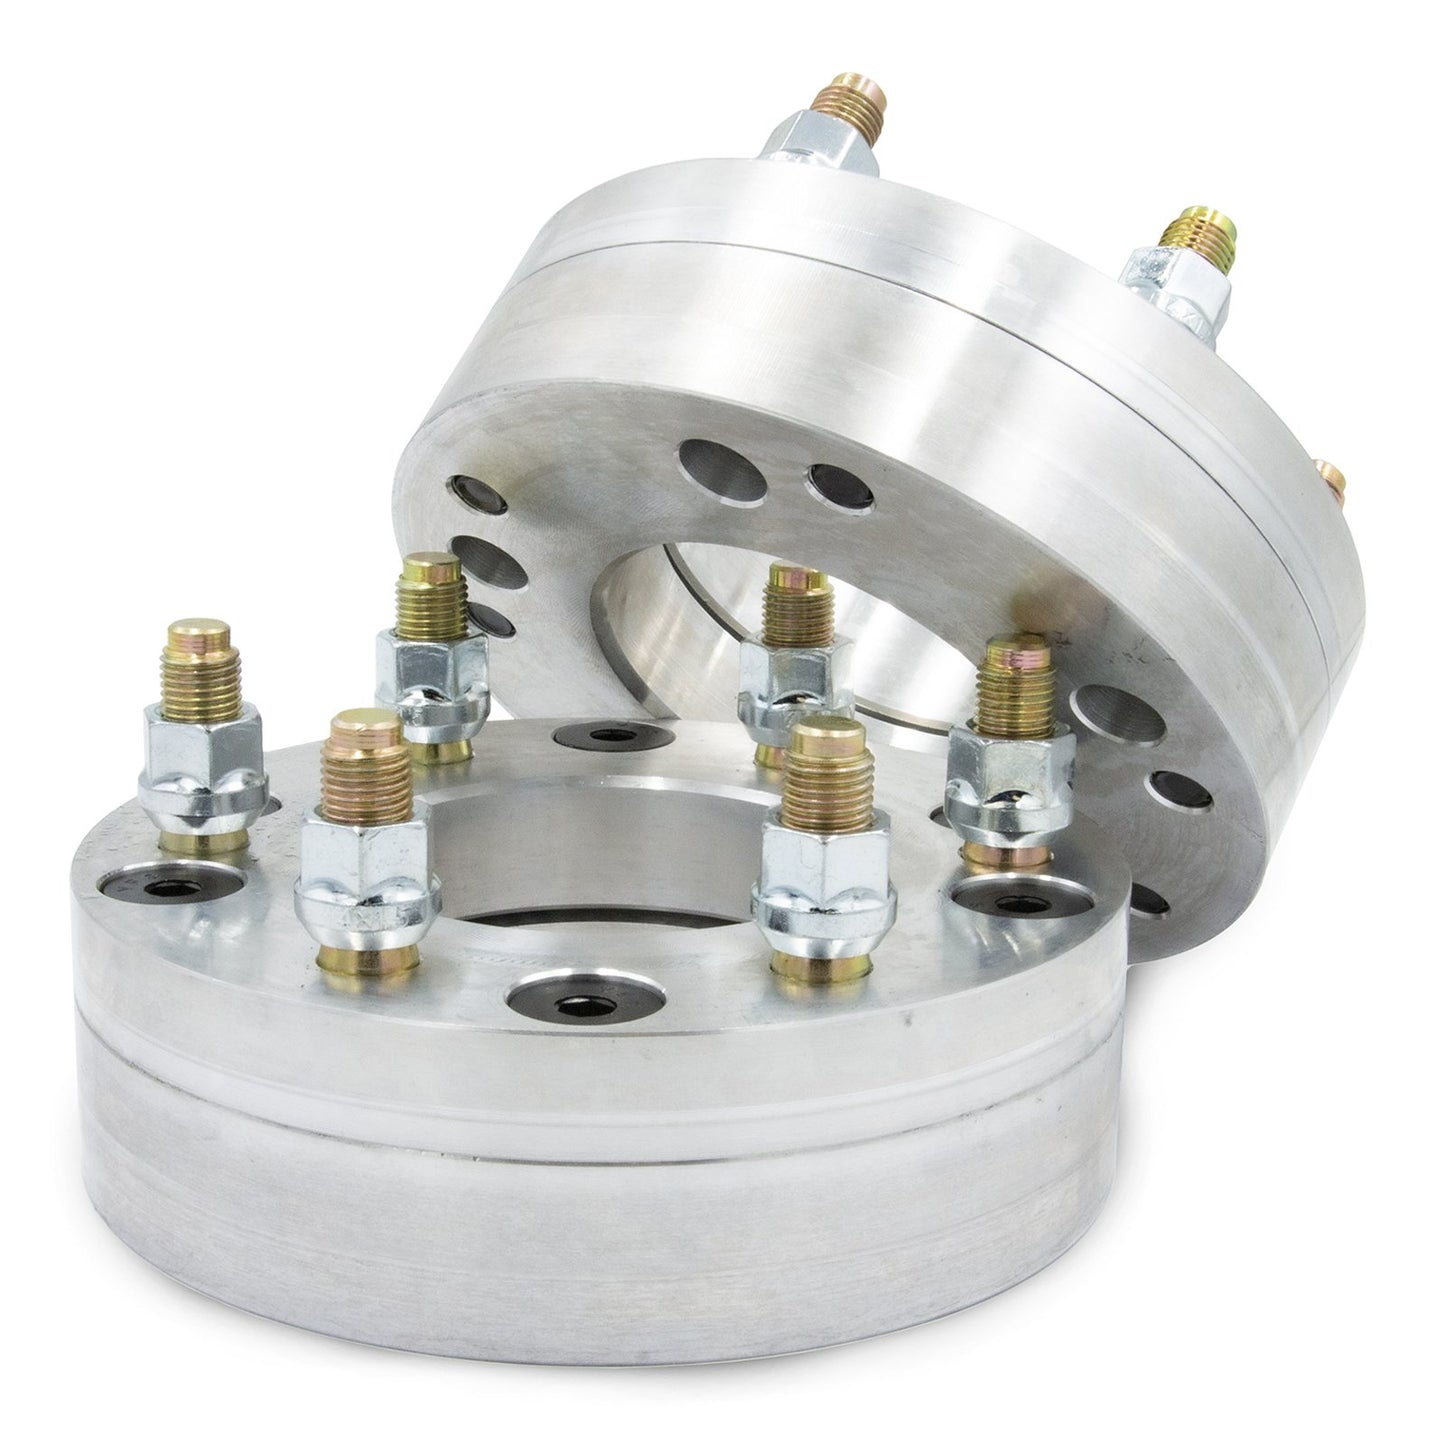 5x130 to 6x5.5" 2 piece Wheel Adapter - Thickness: 1.5" - 3"